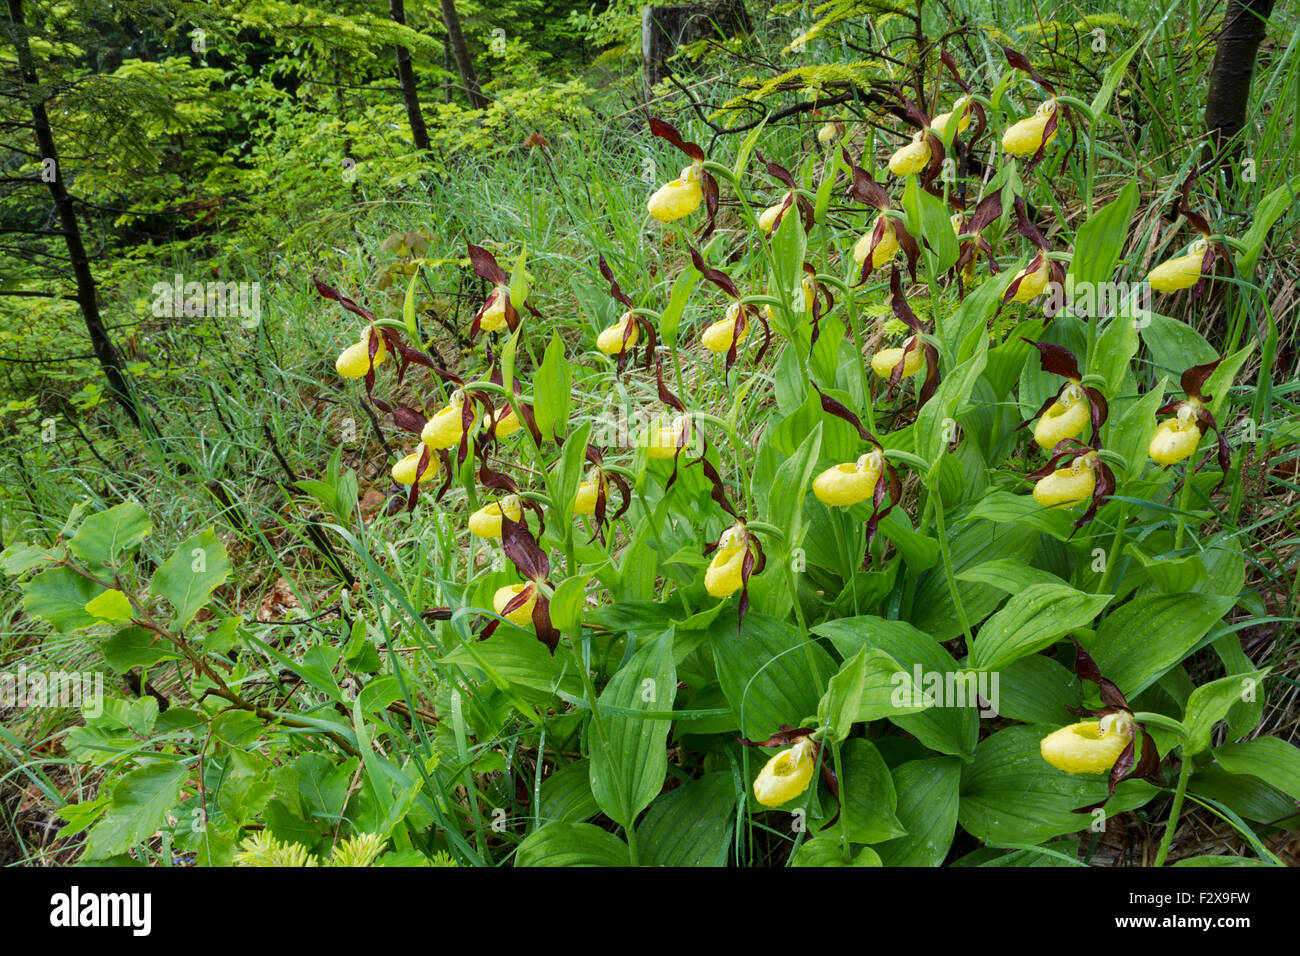 Lady's slipper orchid, Latin name Cypripedium calceolus, yellow, growing in a large group covered in raindrops Stock Photo